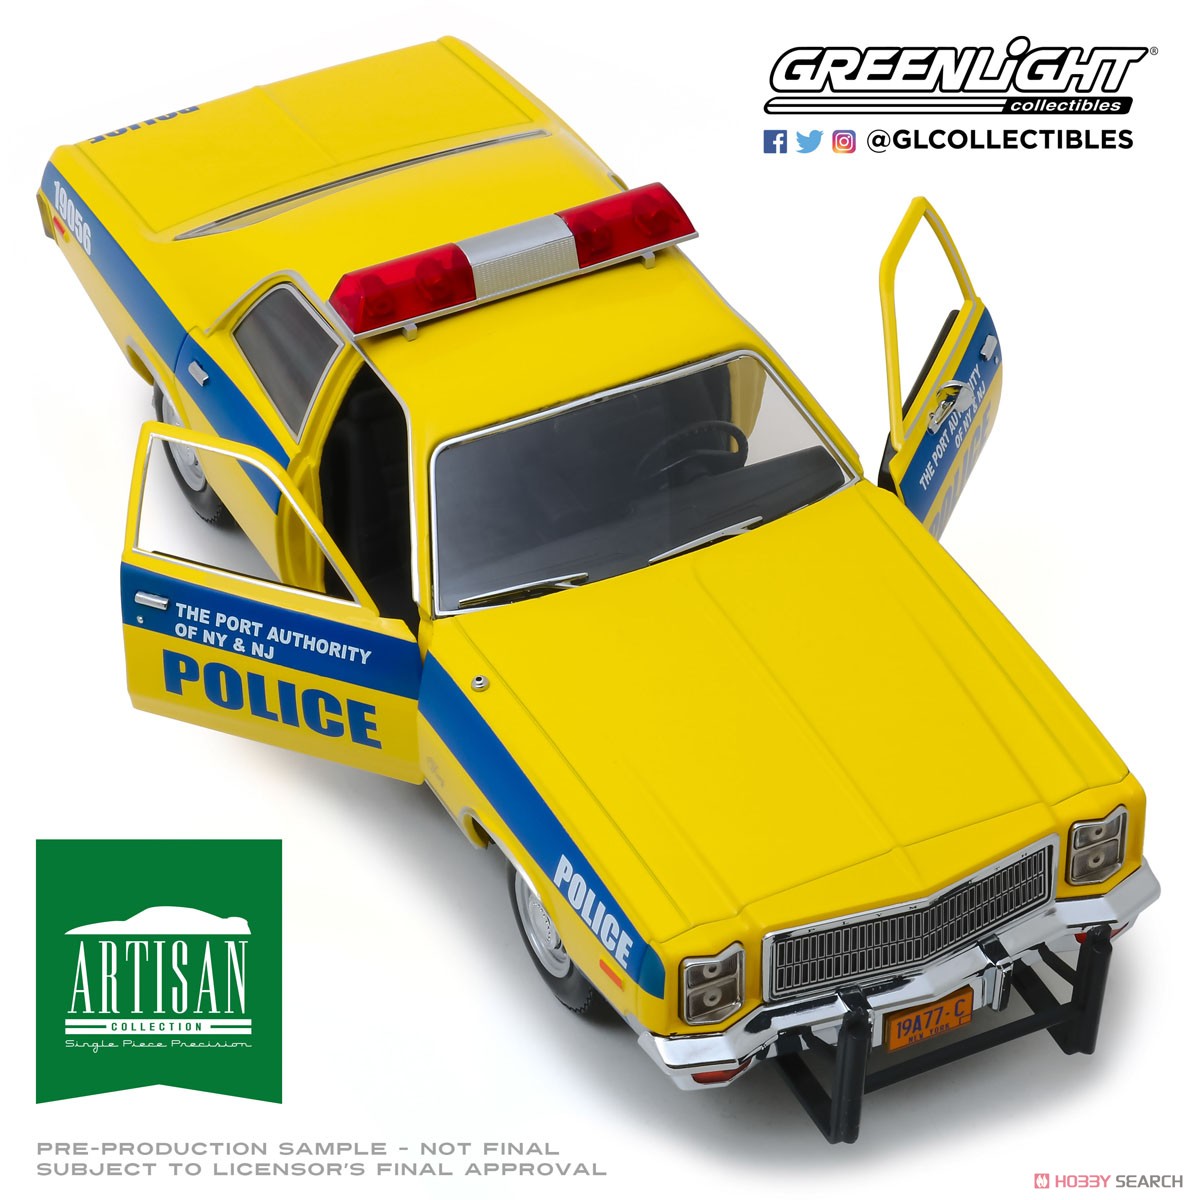 Artisan Collection - 1977 Plymouth Fury - Port Authority of New York & New Jersey Police (ミニカー) 商品画像3